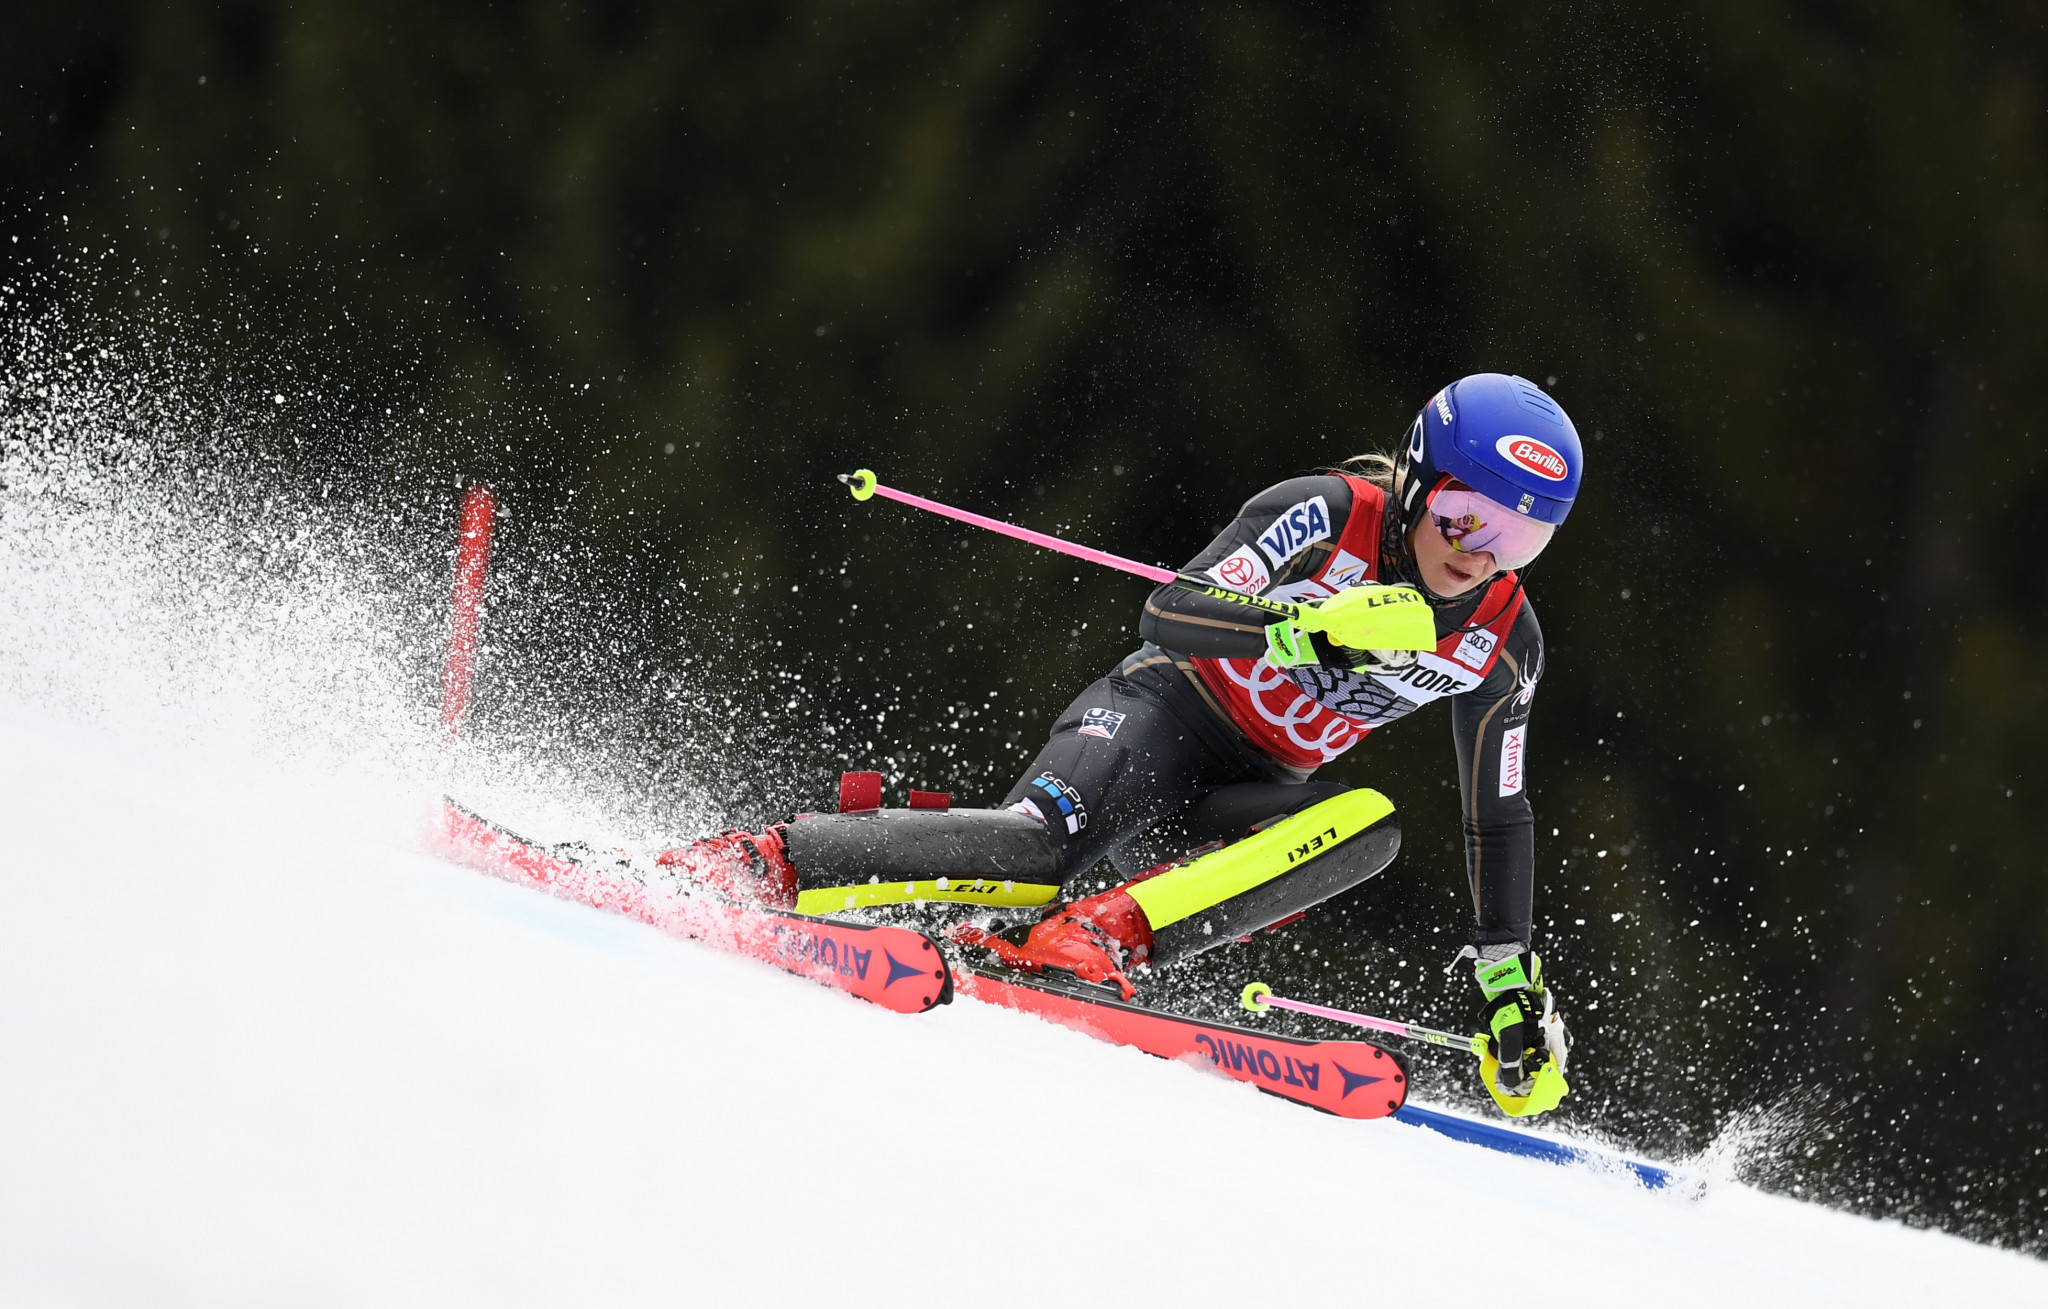 America's Mikaela Shiffrin returned to World Cup winning form ©Getty Images